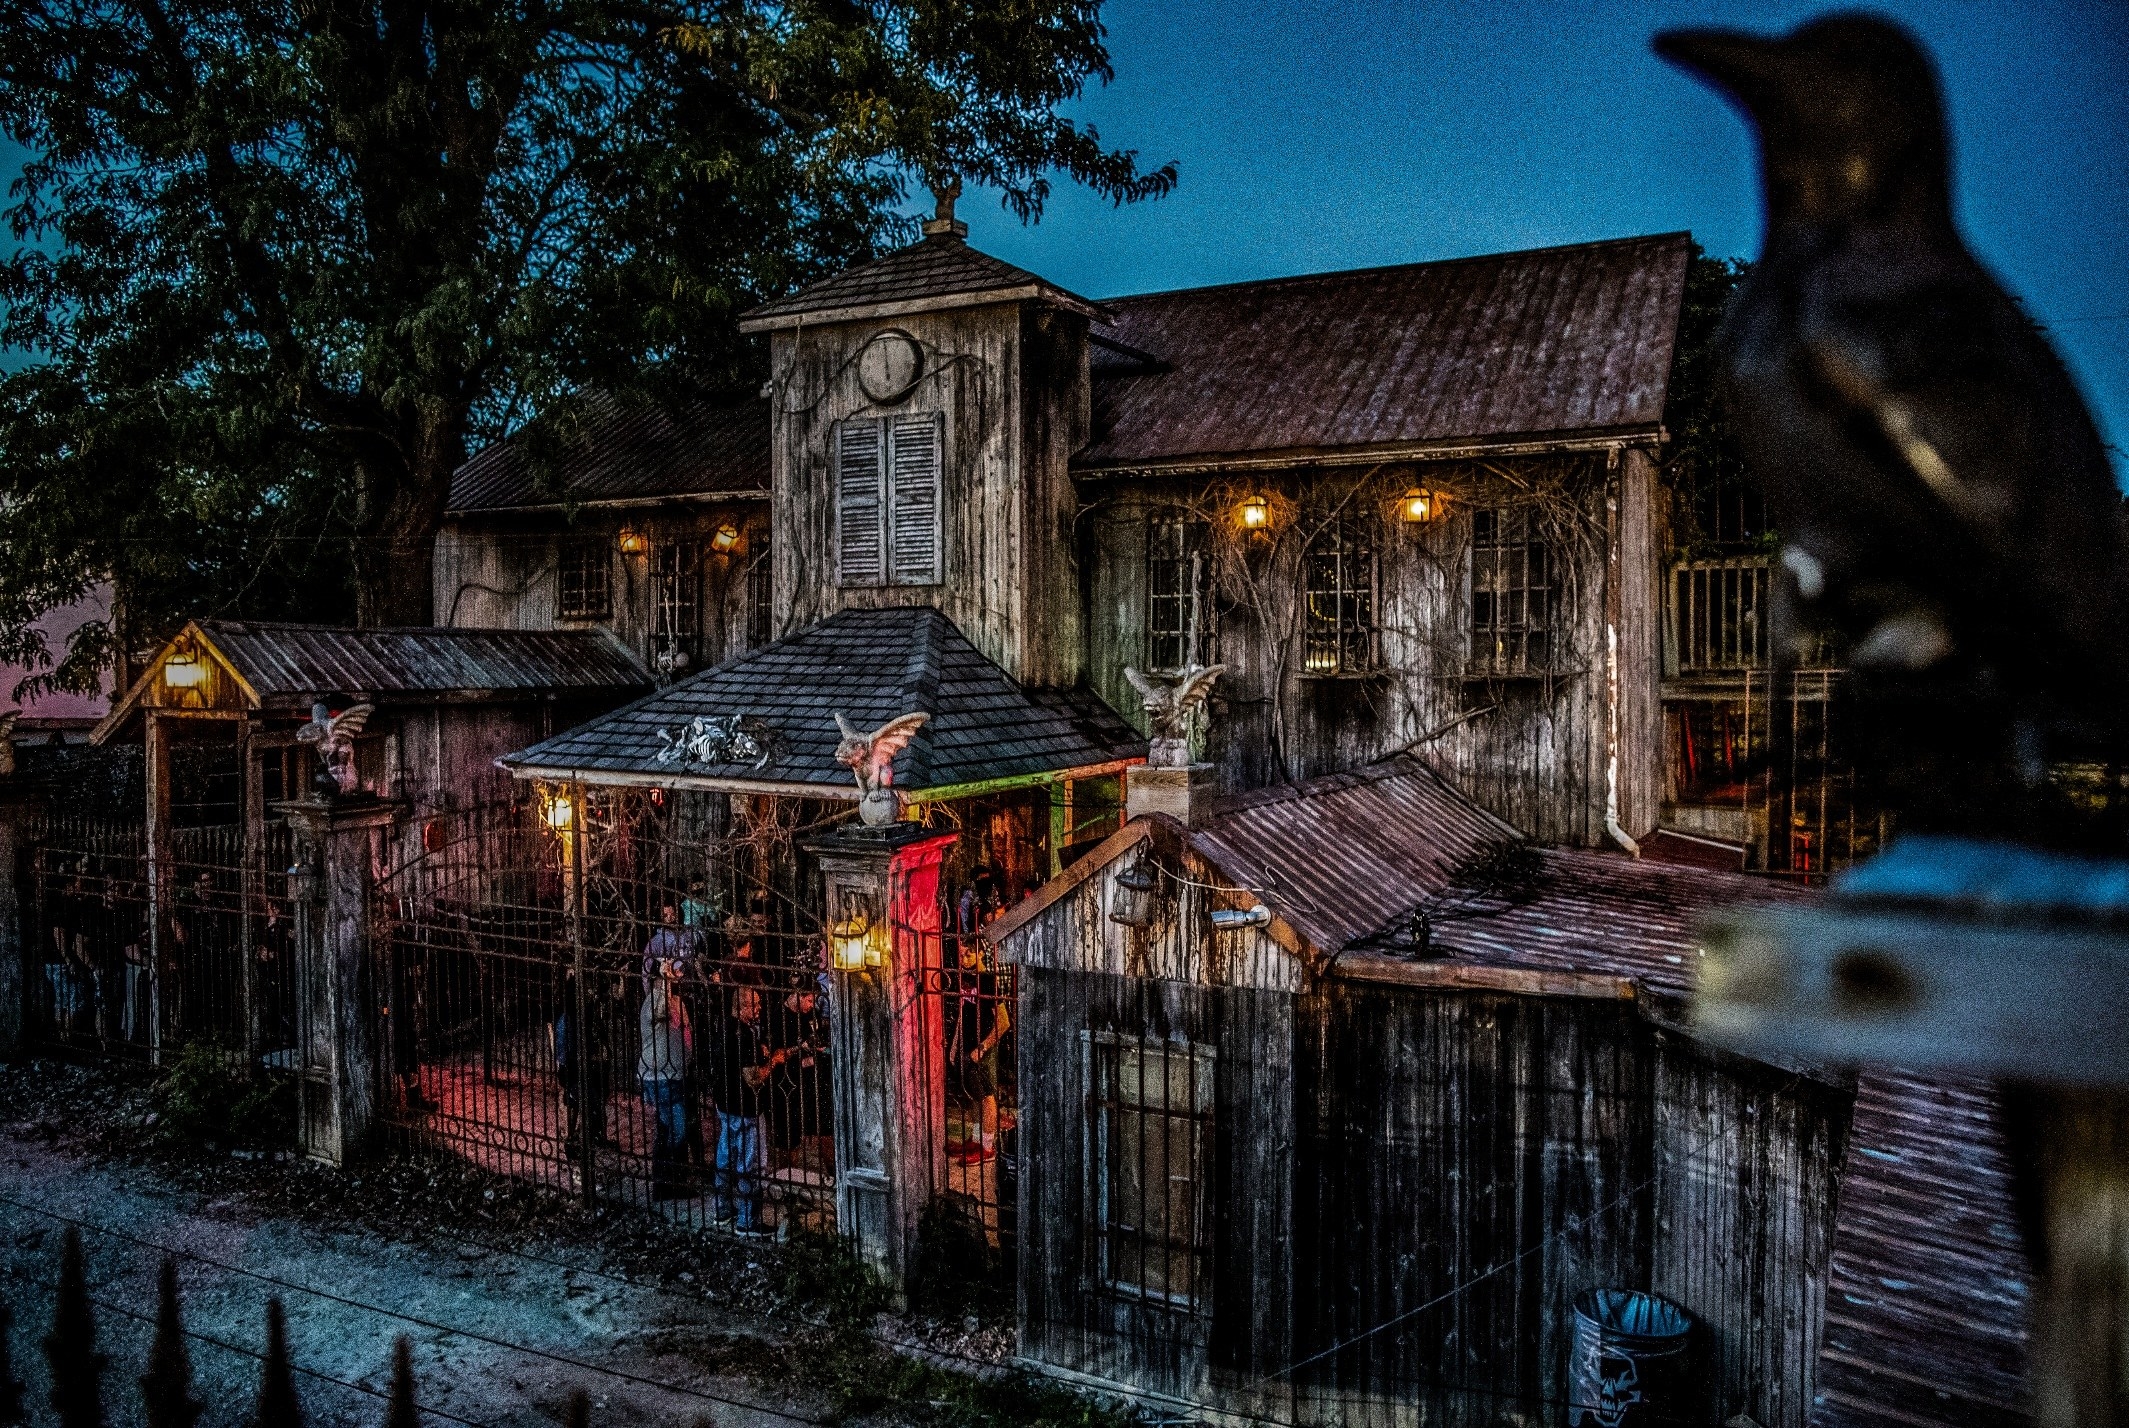 One of the highly-detailed haunted attractions at &quot;Field of Screams&quot;